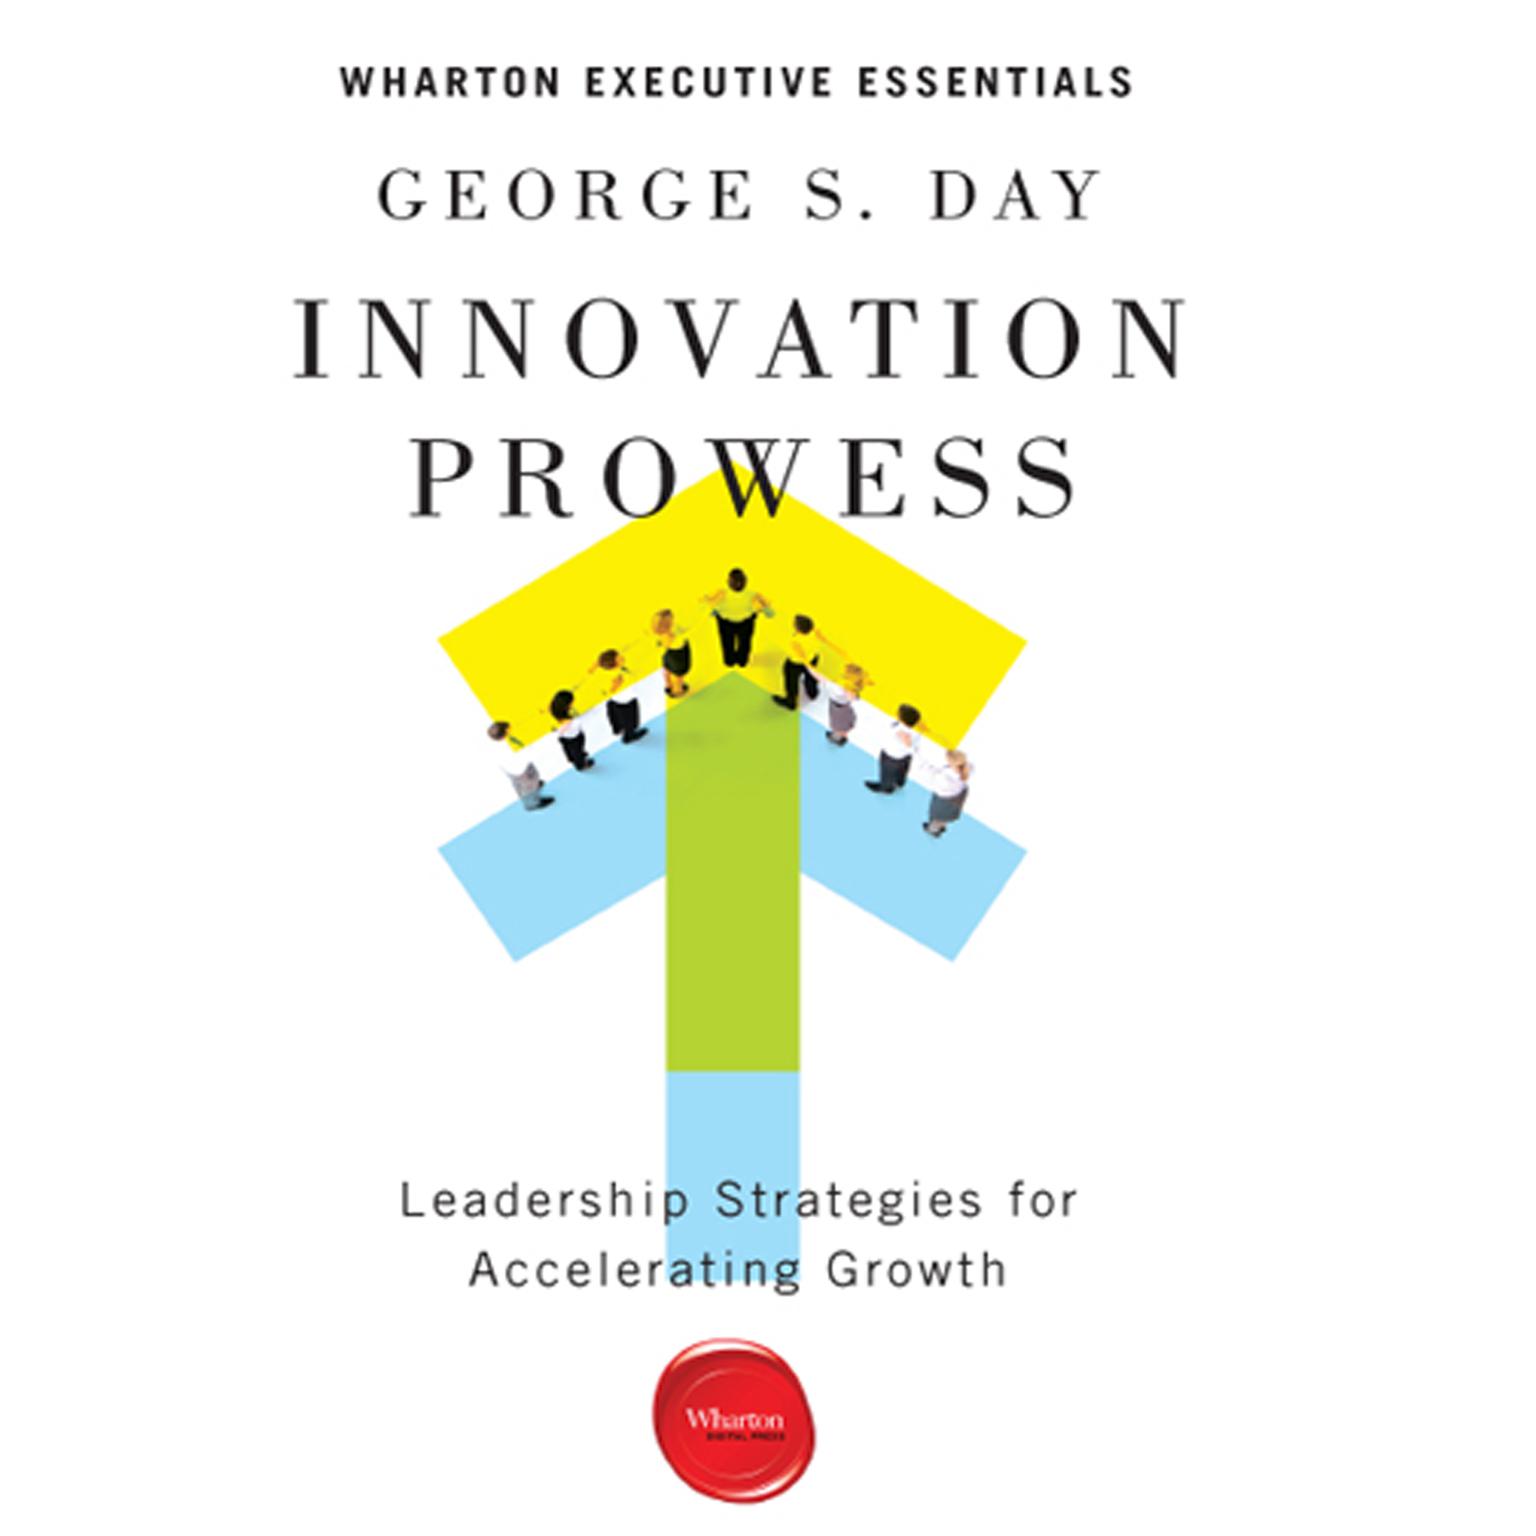 Innovation Prowess: Leadership Strategies for Accelerating Growth (Wharton Executive Essentials) Audiobook, by George S. Day